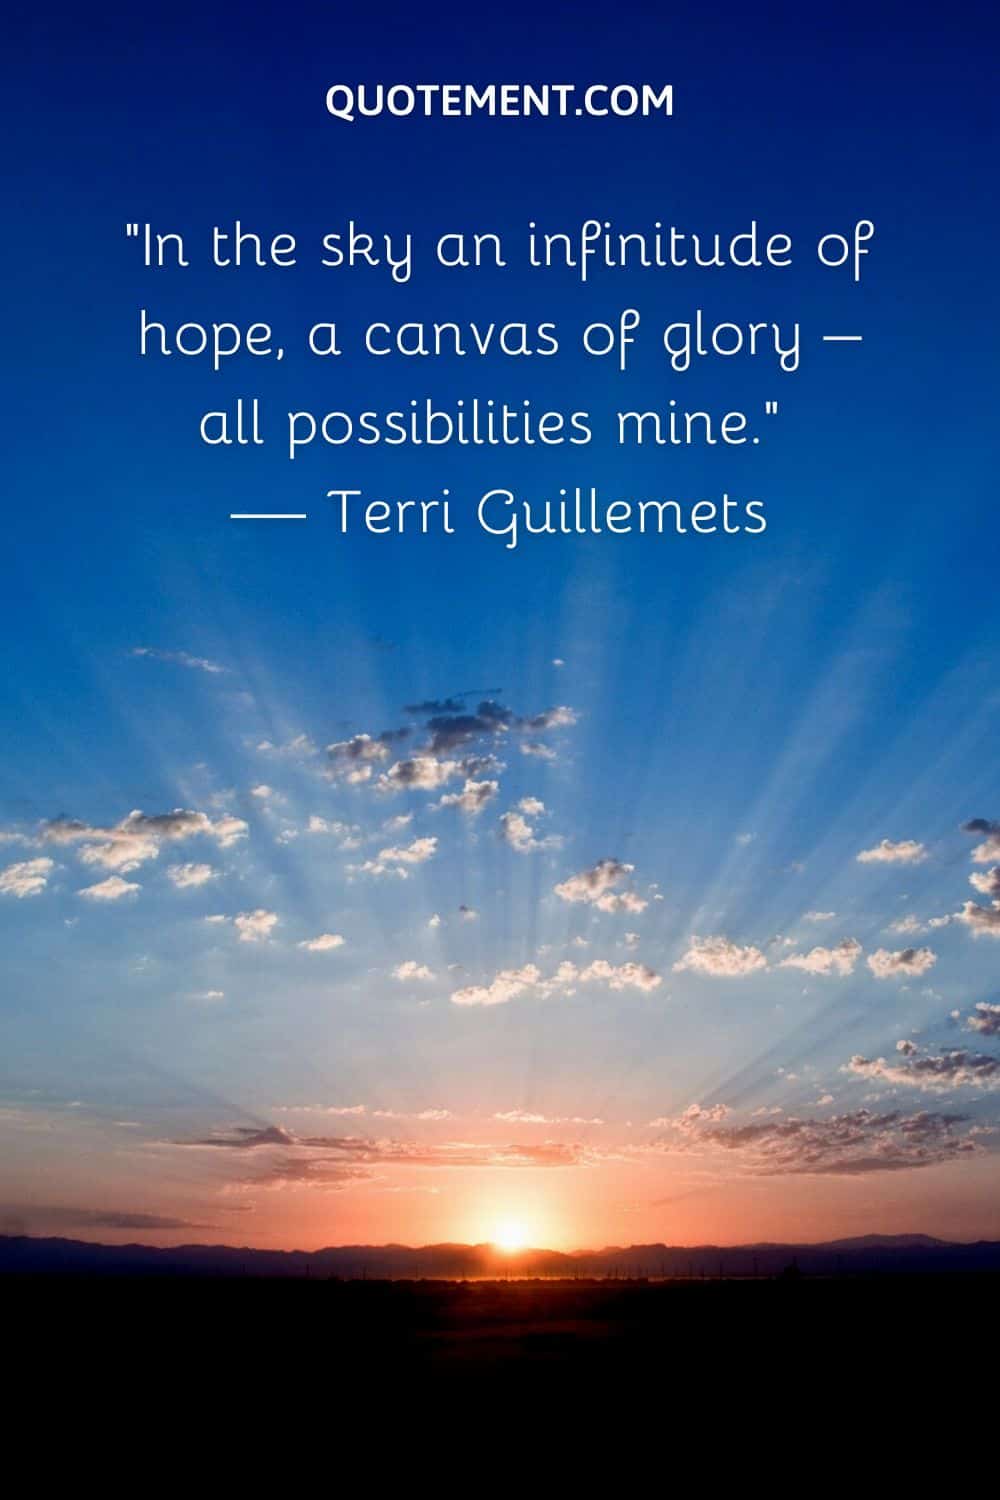 In the sky an infinitude of hope, a canvas of glory – all possibilities mine.